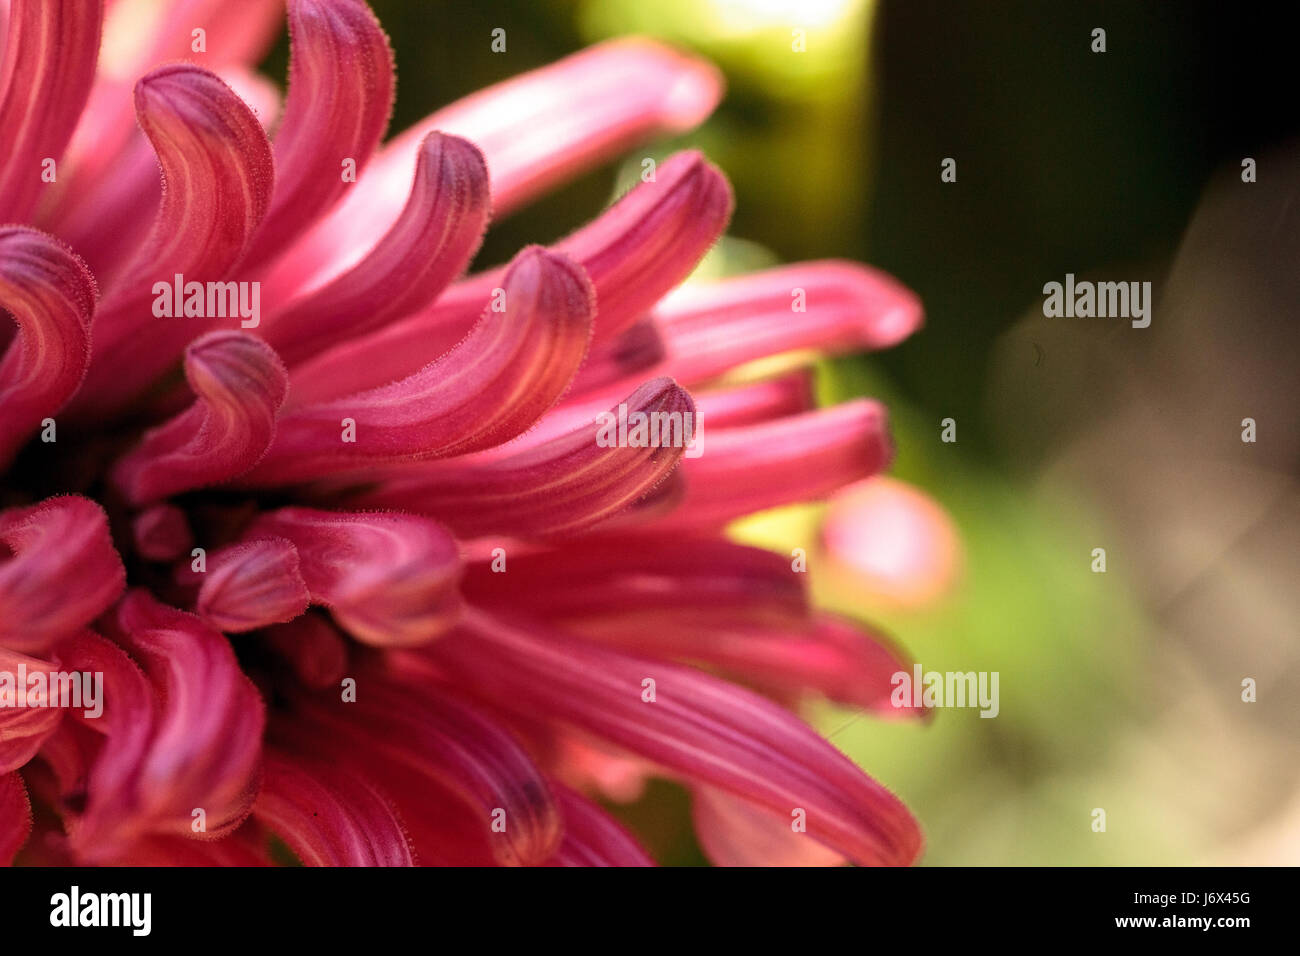 Brazilian plume flower Justicia carnea blooms with pink flowers on a bush in spring. Stock Photo